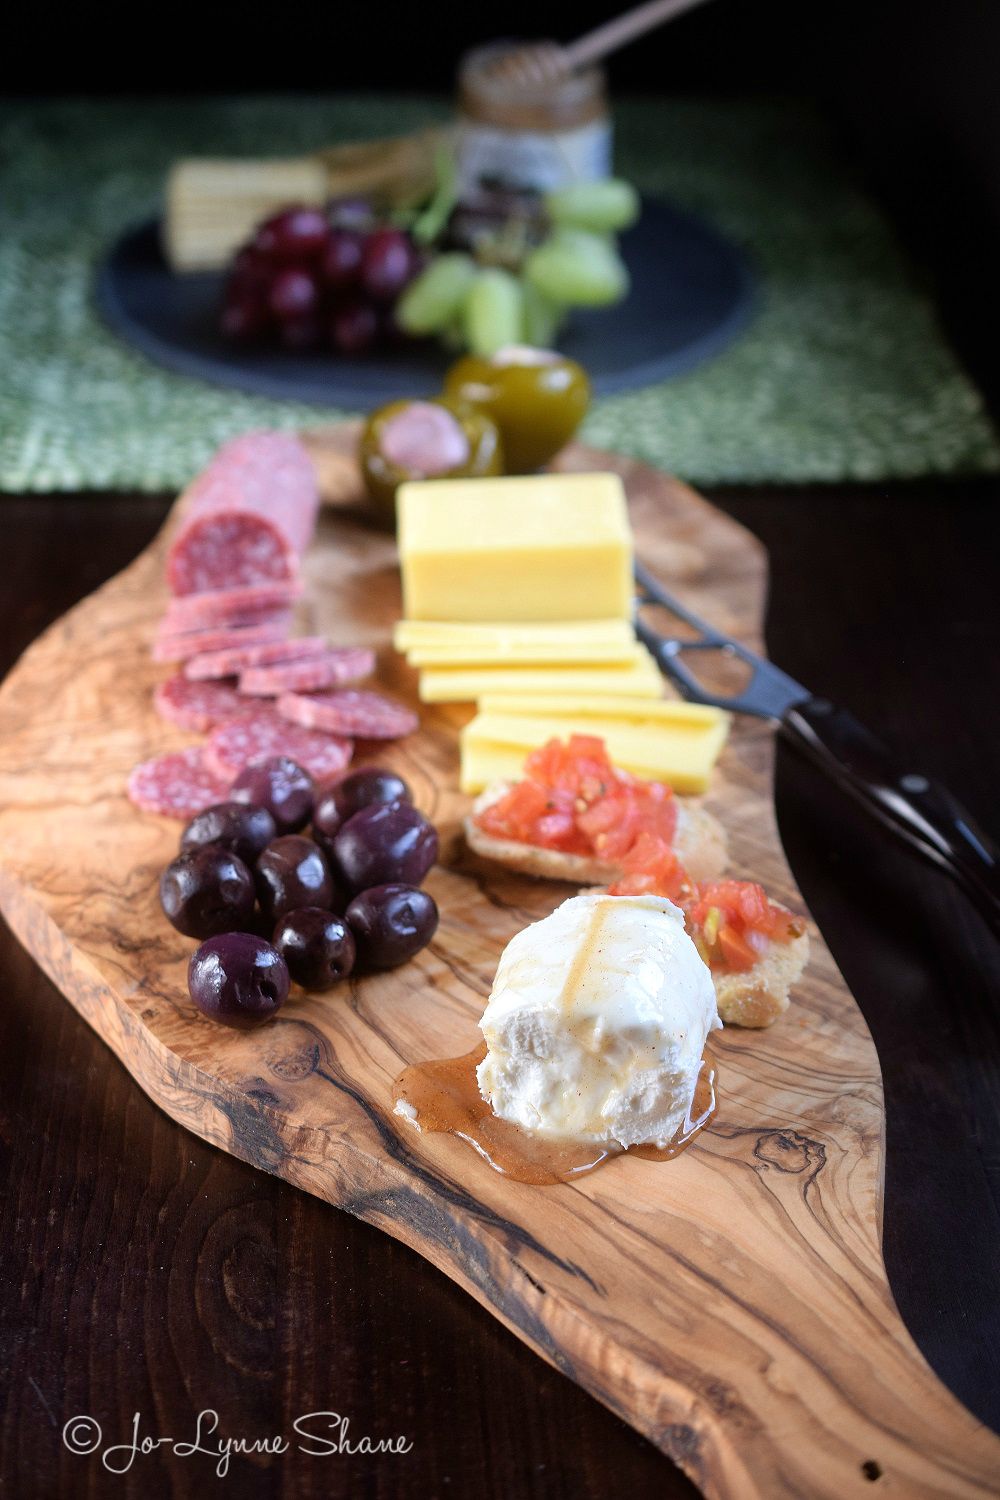 Cheese & Fruit on a Cutting Board makes a rustic and beautiful presentation for casual entertaining!